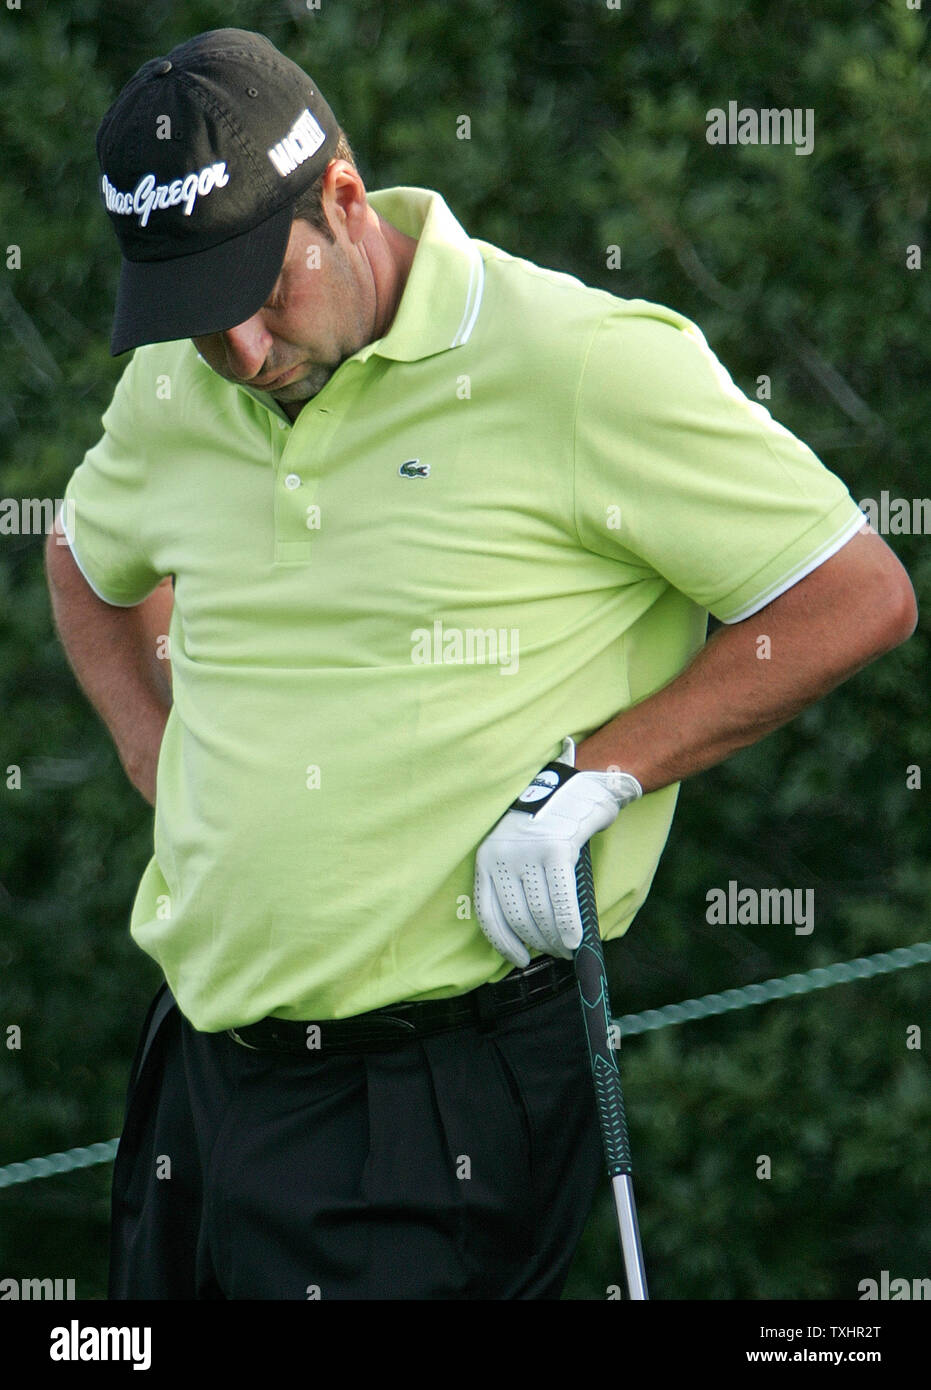 With only four points in The International Modified Stableford scoring system, Jose Maria Olazabal waits to hit his second tee shot at the first hole during the second round of The International at Castle Pines Golf Club in Castle Rock, Colorado August 11, 2006.   Olazabal is third on the Ryder Cup World Points list.   (UPI Photo/Gary C. Caskey) Stock Photo